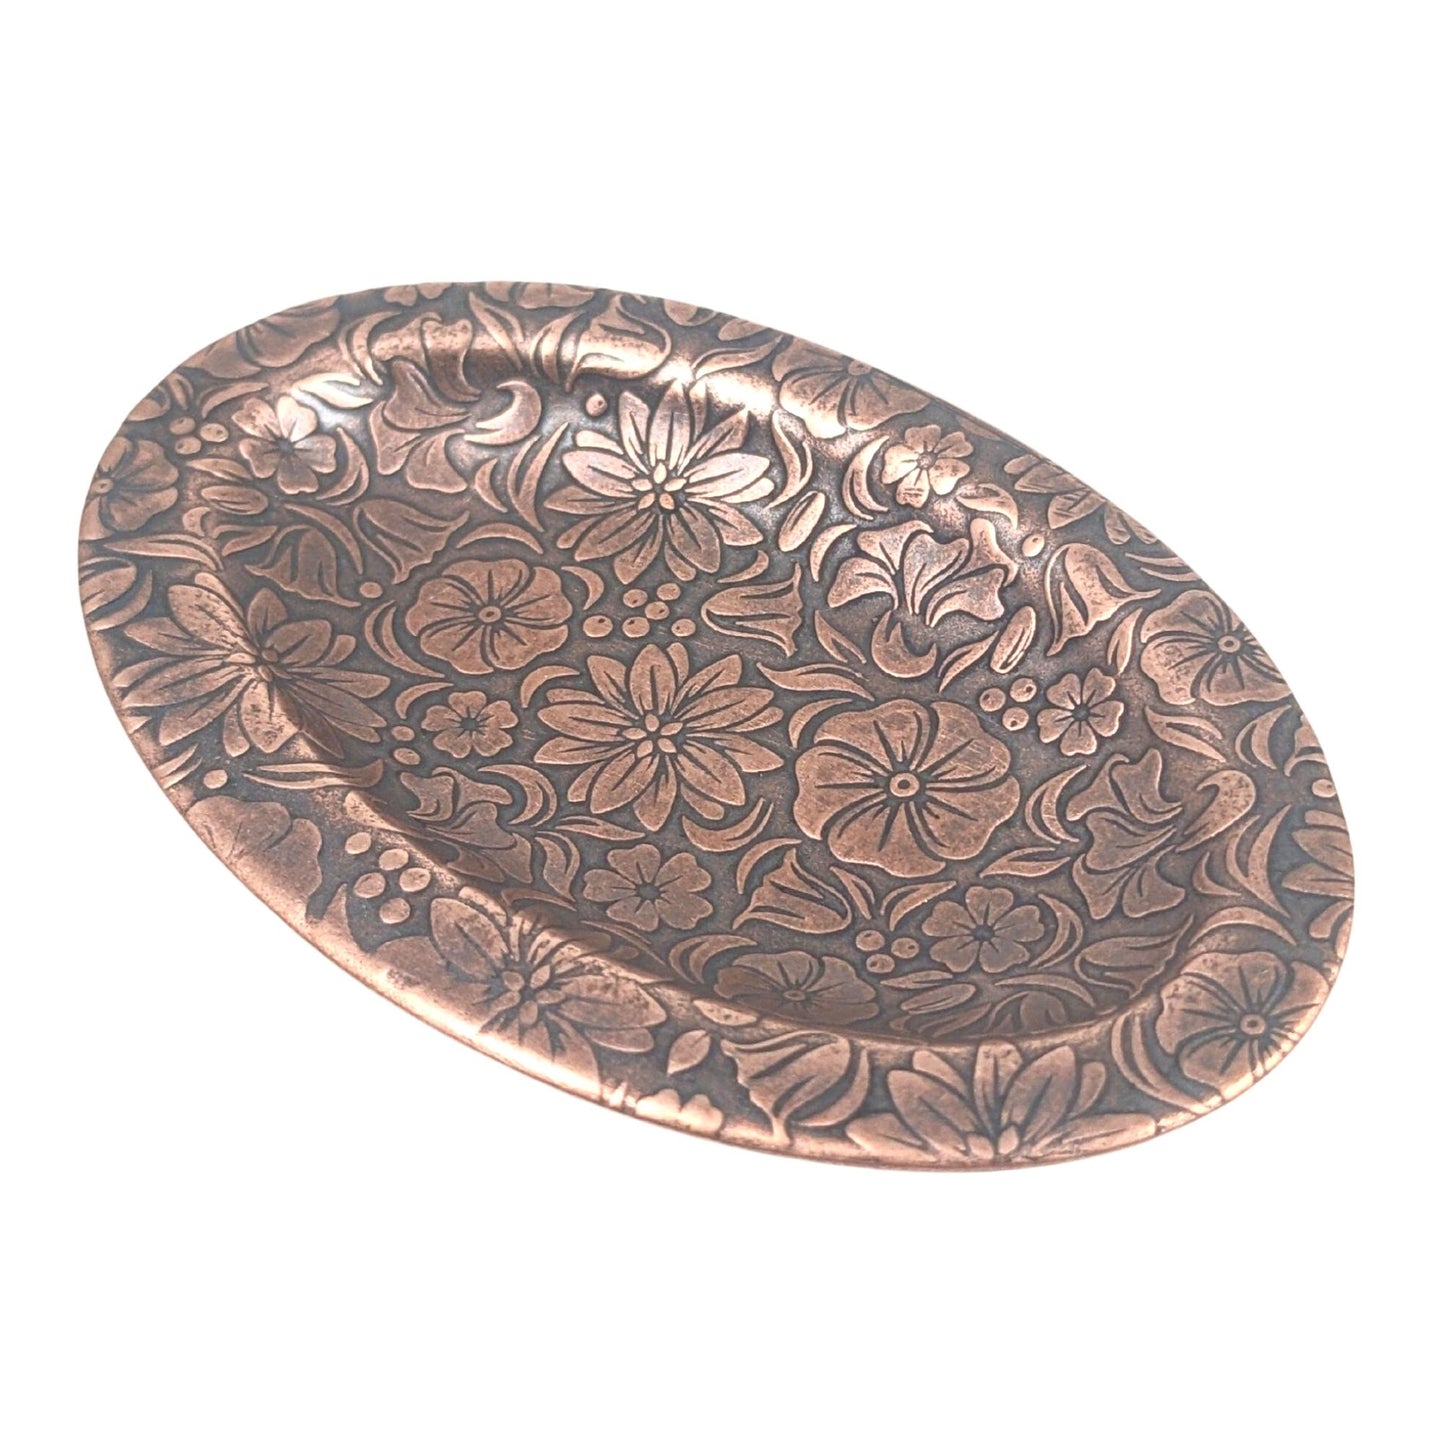 Oval copper ring dish with raised edge. Design of a variety of garden flowers, leaves, and berries covers the entire surface.